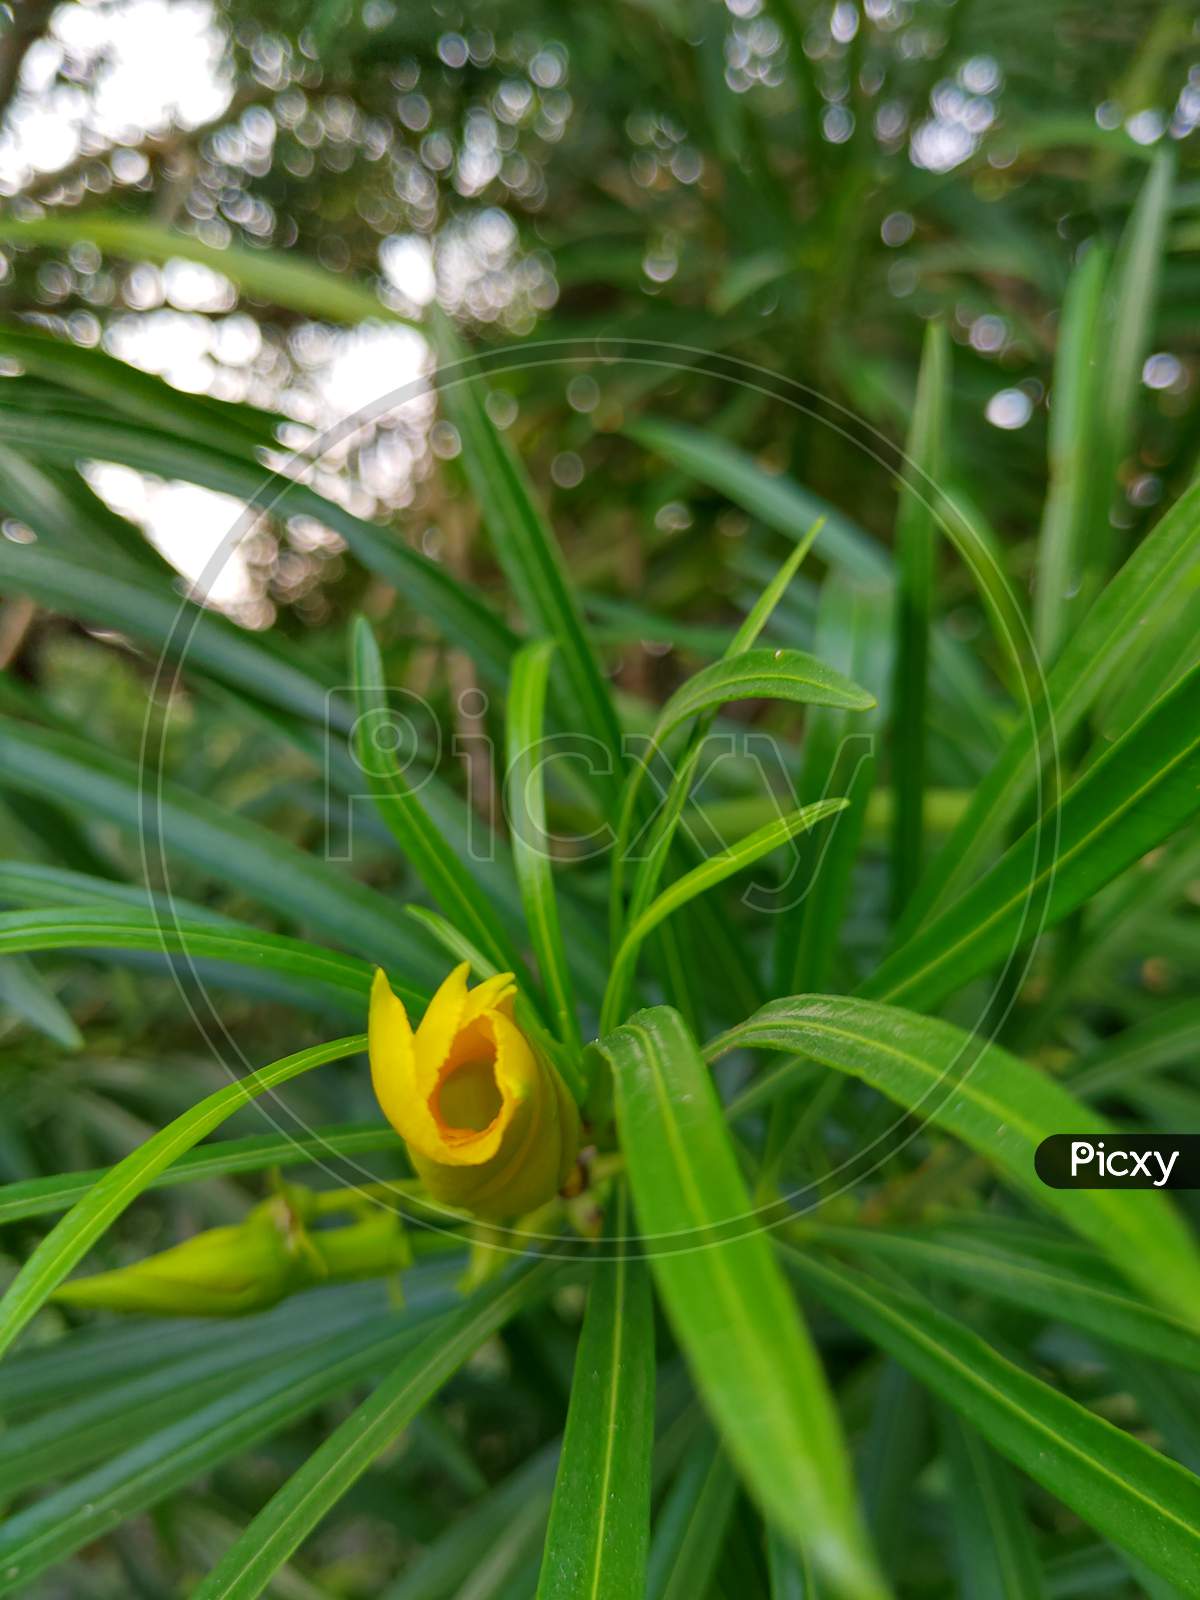 Close shot of a yellow flower between the green leaves.